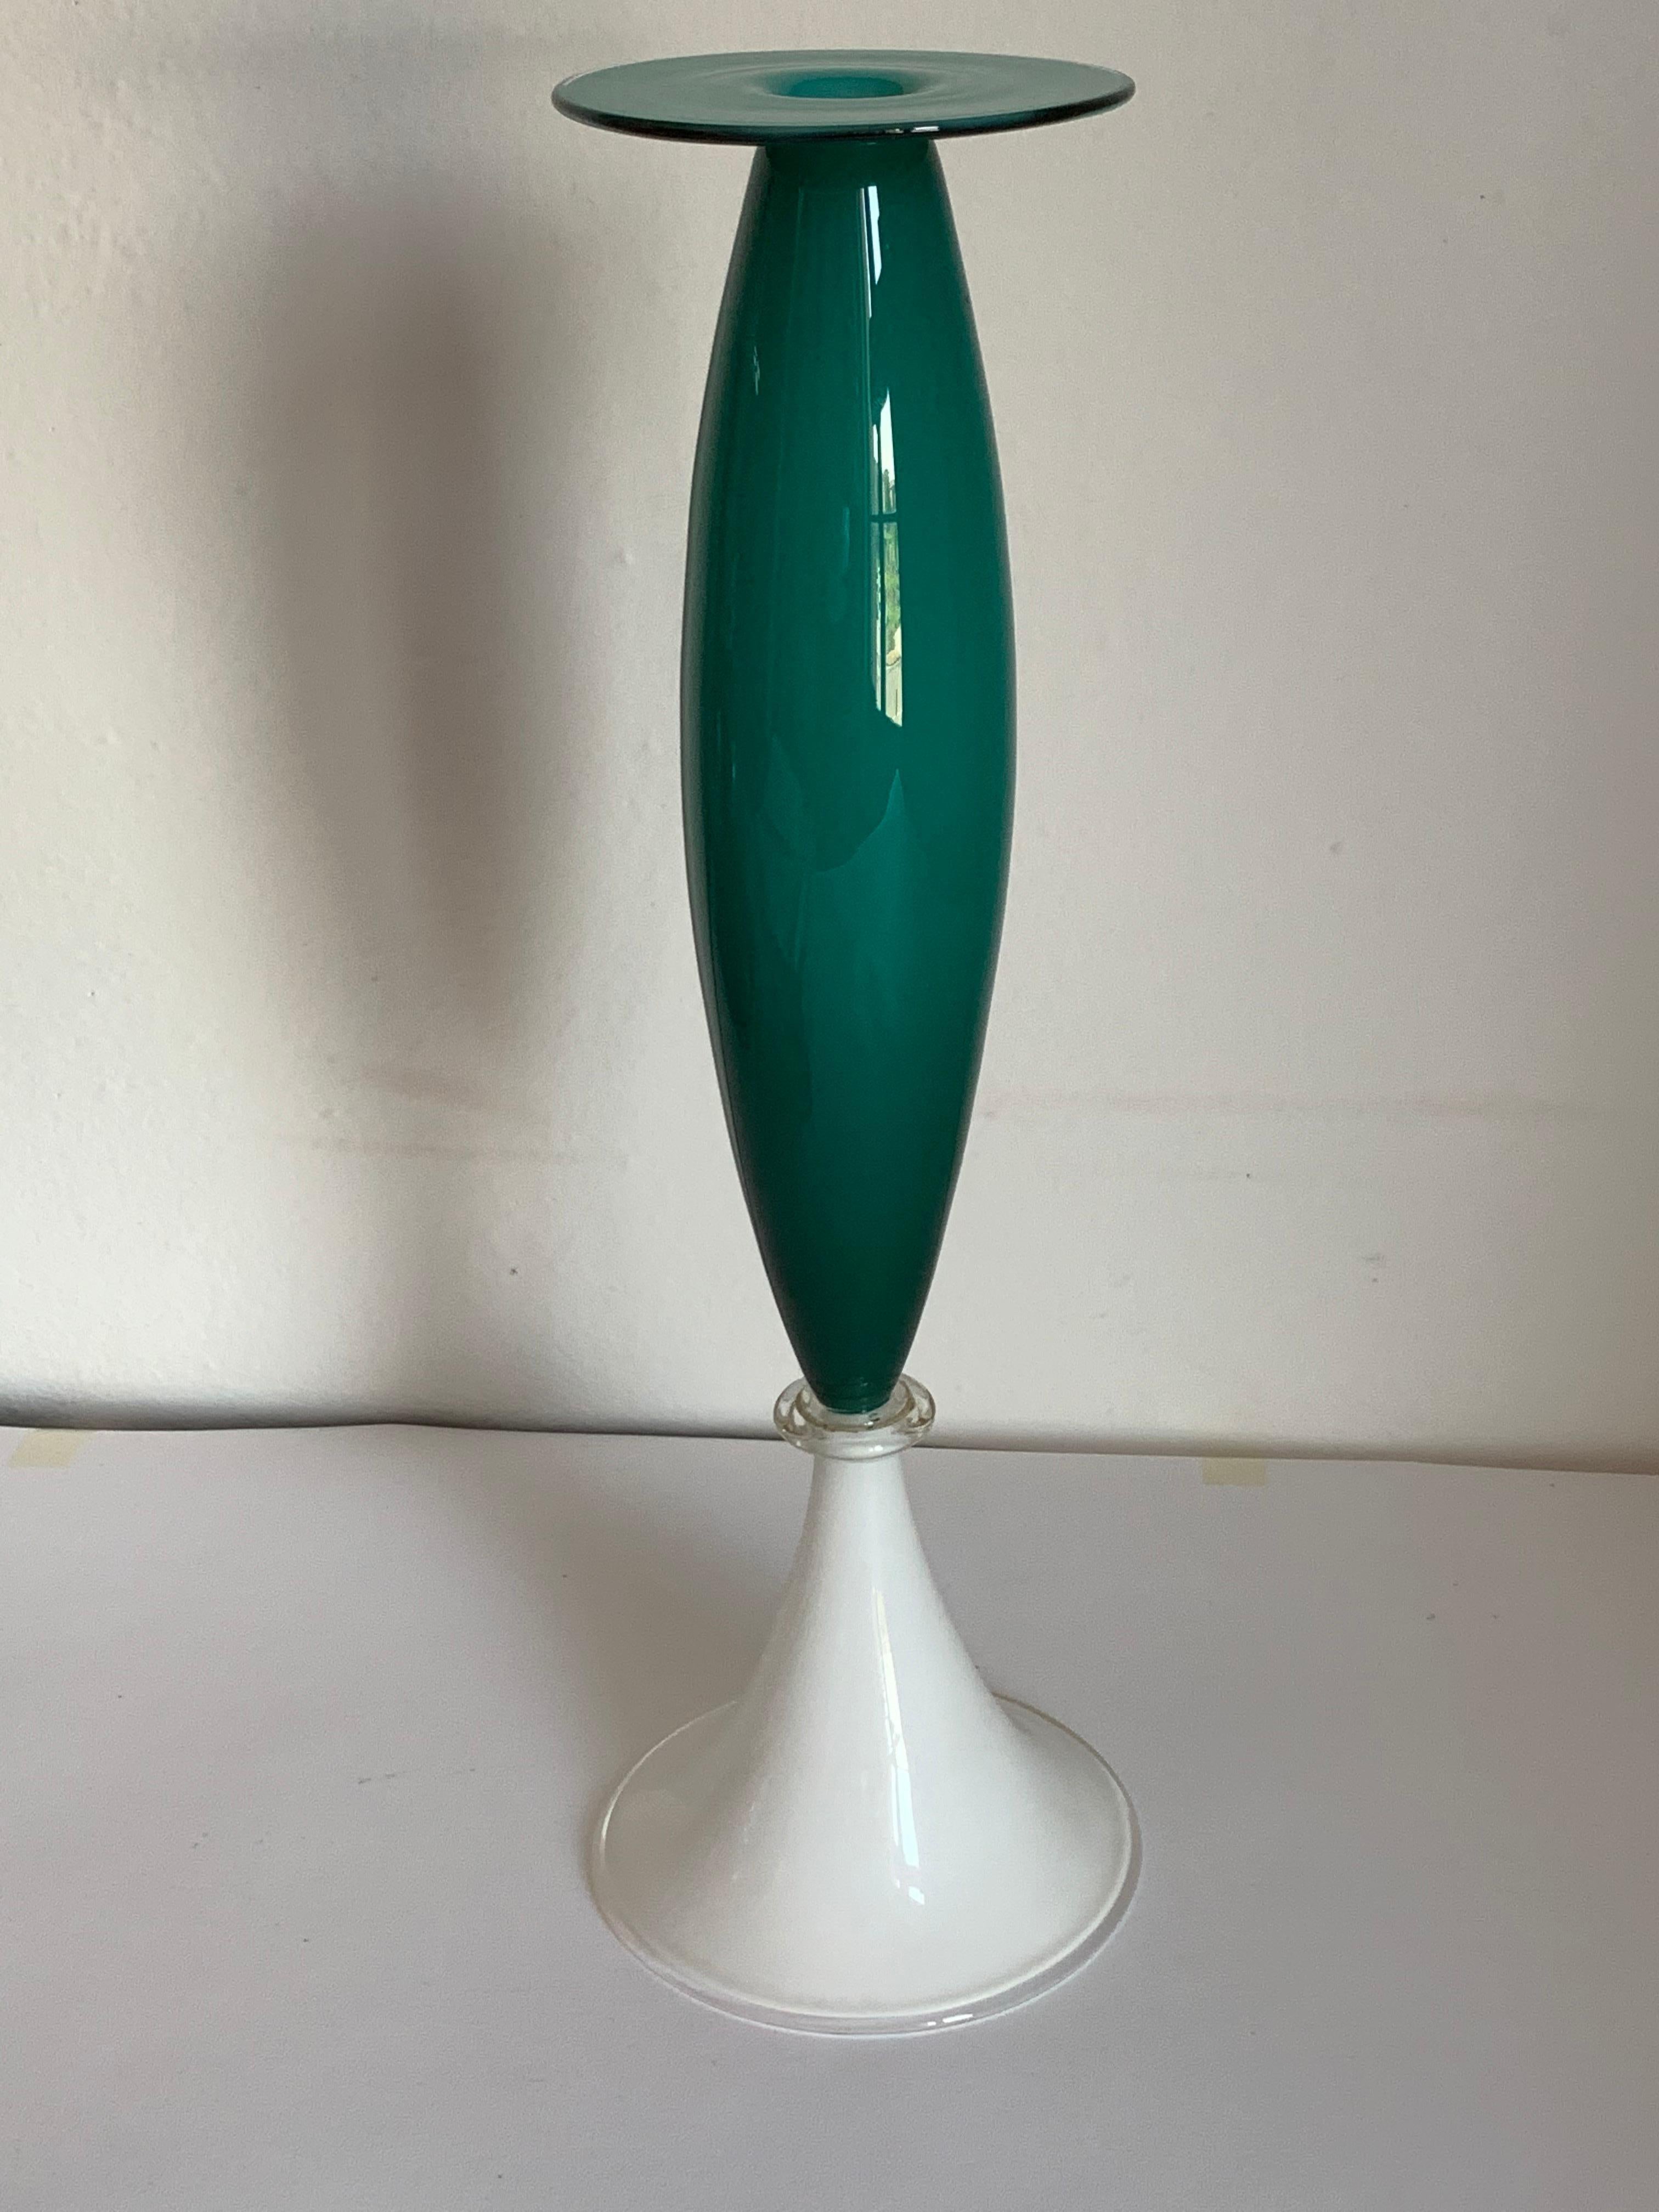 Murano glass vase designed by Yoichi Ohira for De Majo in 1991. 
Rondò series in blown glass on a high two-color opal base. Signature and date engraved on the base.